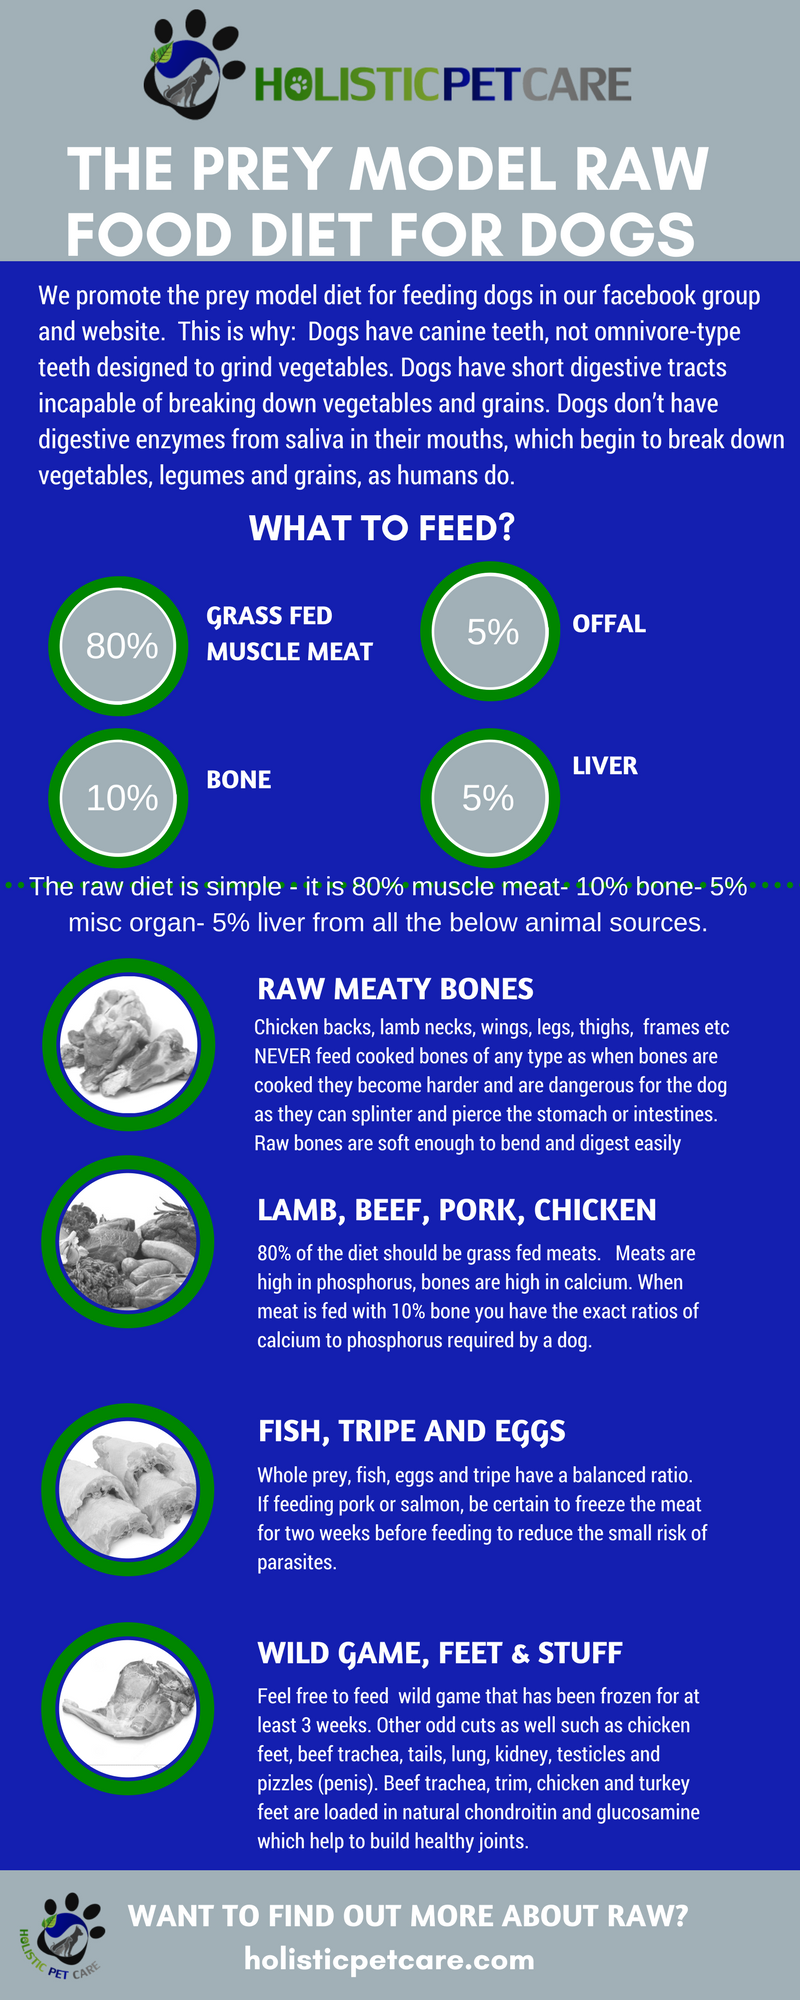 What is the raw food diet for dogs